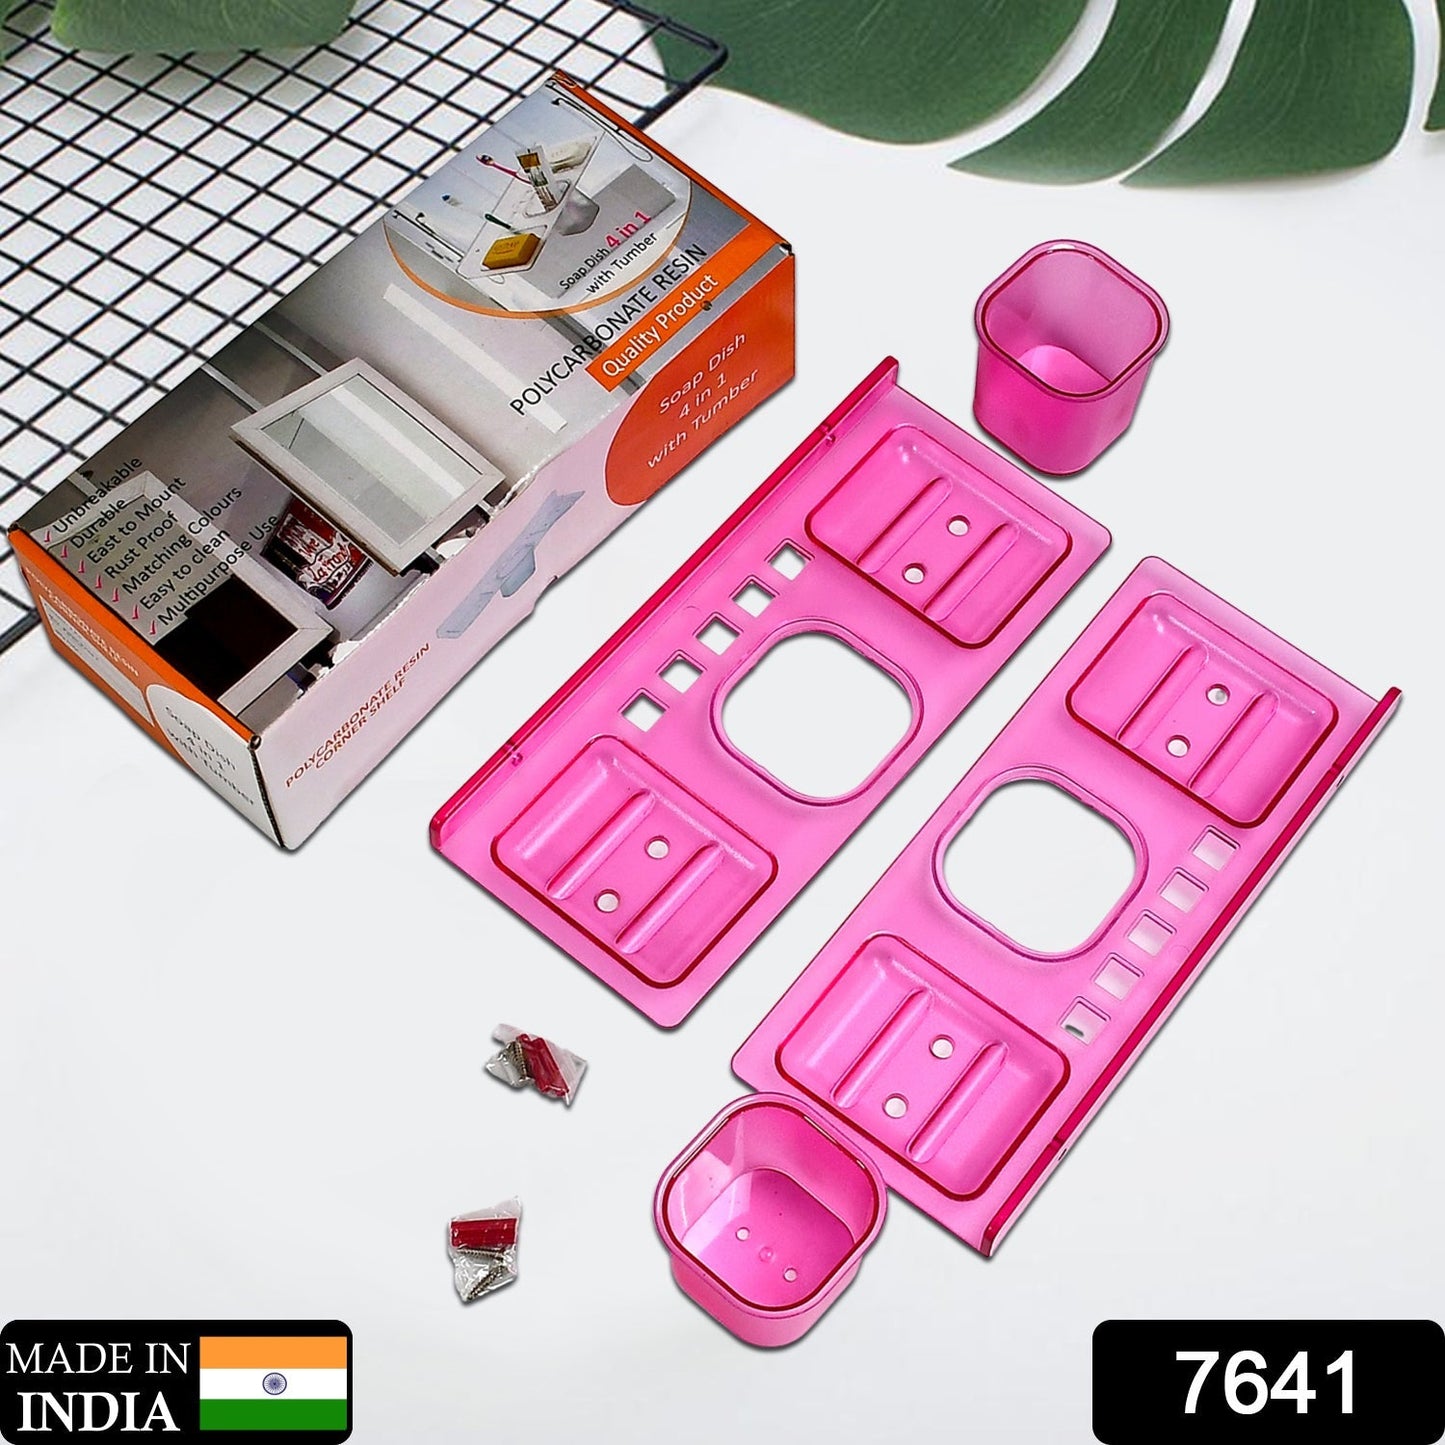 7641 Shop a wide range of bathroom ware products from Pure Source India, in this pack there coming 4in1 glass soap dish, which is suitable to use on stand .It is having unique design of products will enhance beauty of your bath room. DeoDap